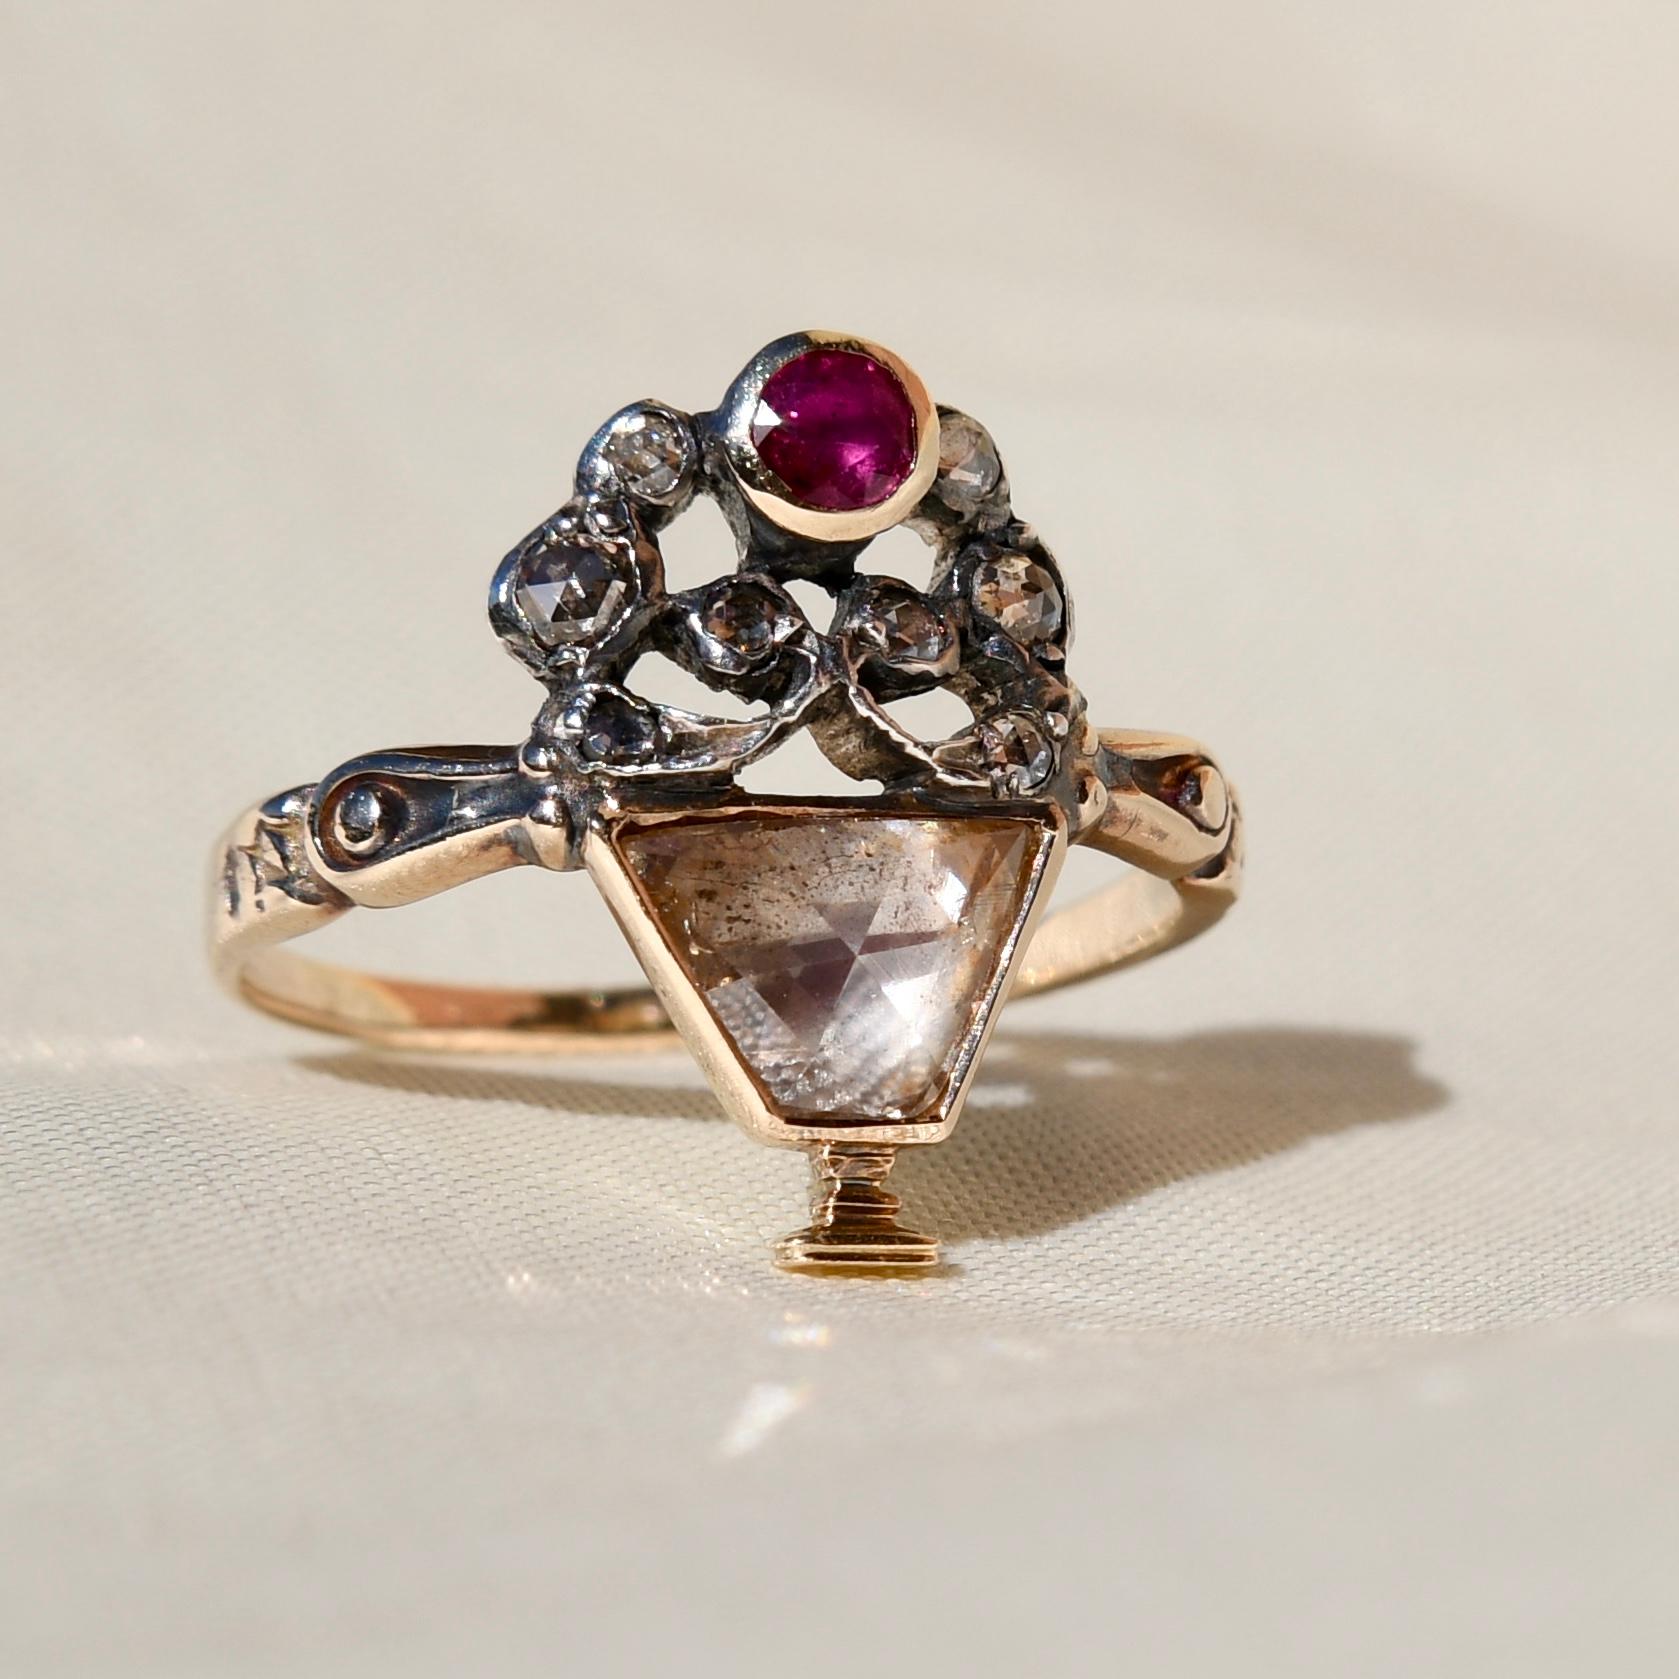 This ring was made in Europe circa 1760 and is in very good, antique condition. The gemstones do not show any signs of wear.

The “Giardinetti” or “Little garden” rings appeared at the very end of the 17th century but were favoured by aristocratic